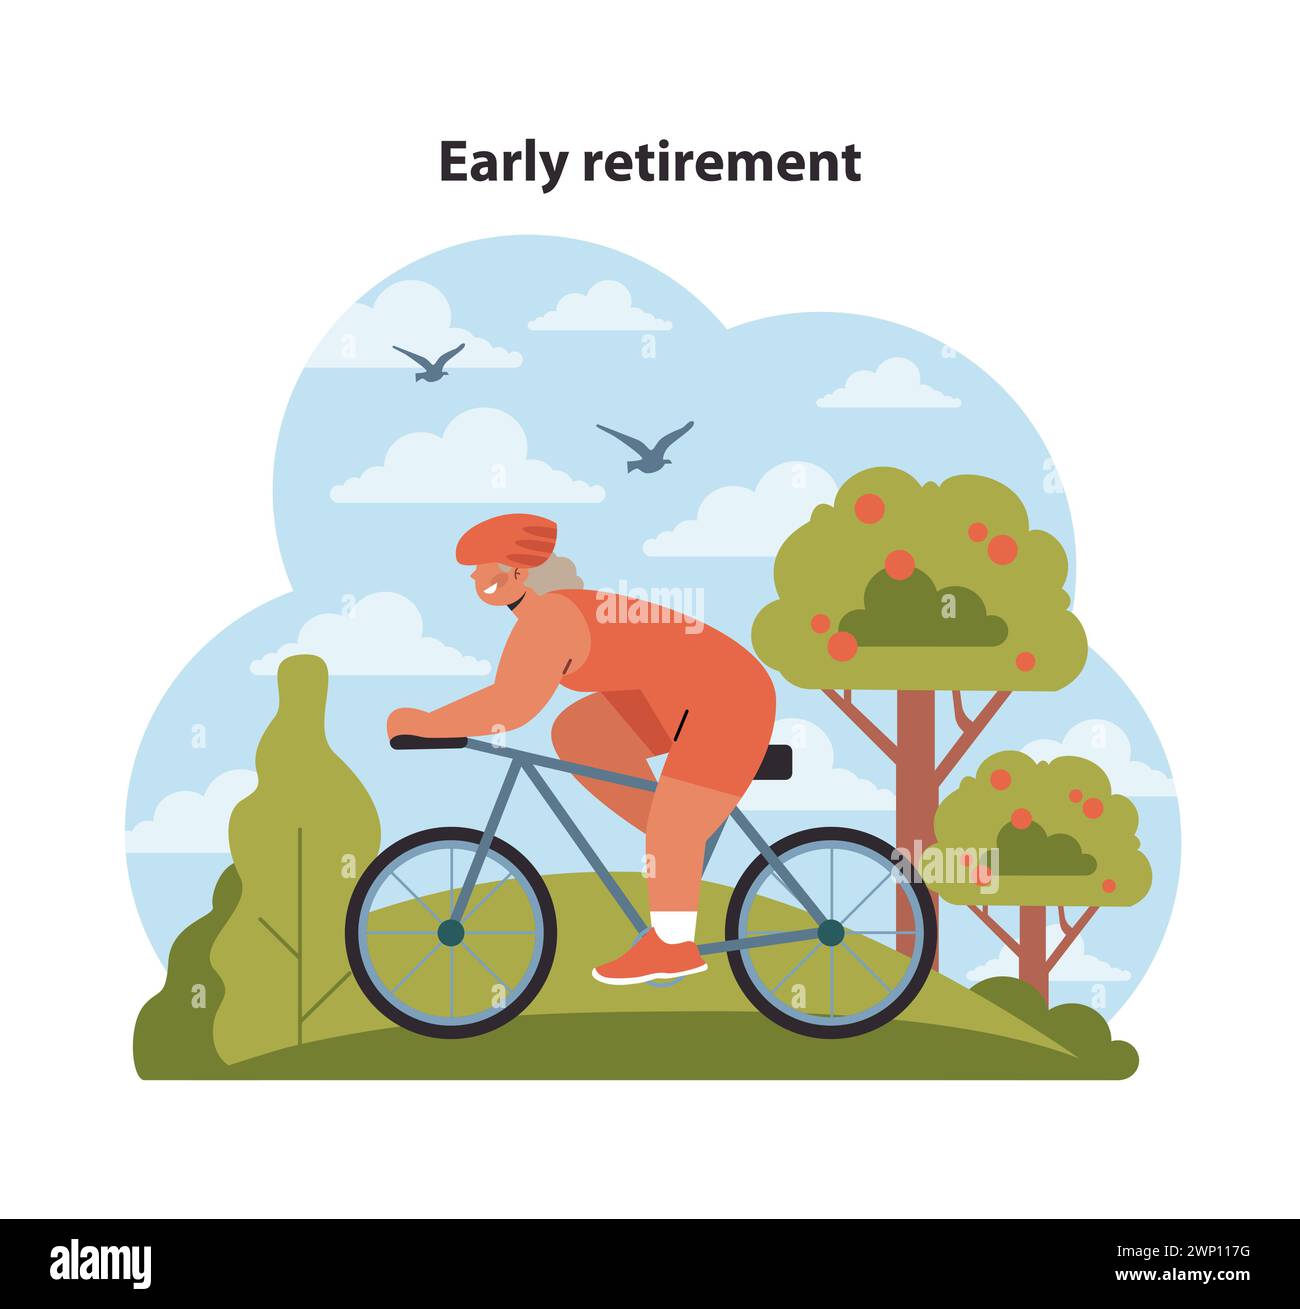 Joyful senior on a bicycle enjoys the scenic beauty of nature, embodying the leisure and freedom of early retirement. Biking adventures await. Flat vector illustration. Stock Vector